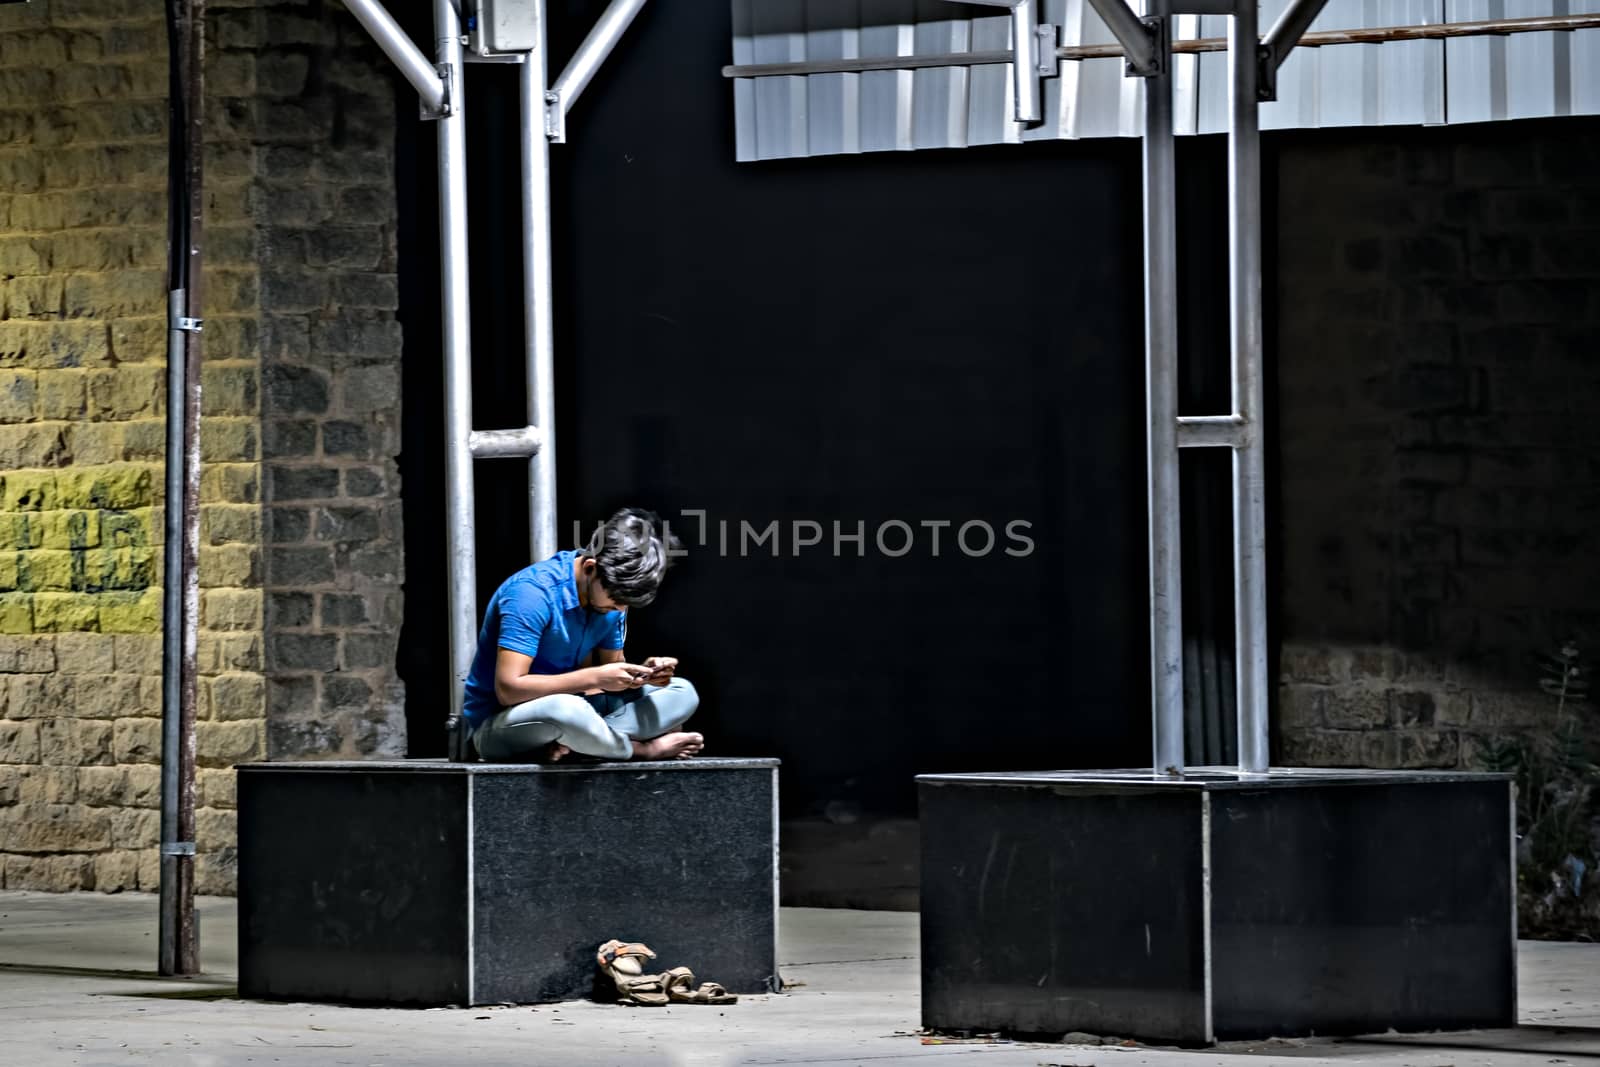 Udupi, Karnataka, India:January 30th, 2019 - Youth engrossed in his cell phone on railway platform.